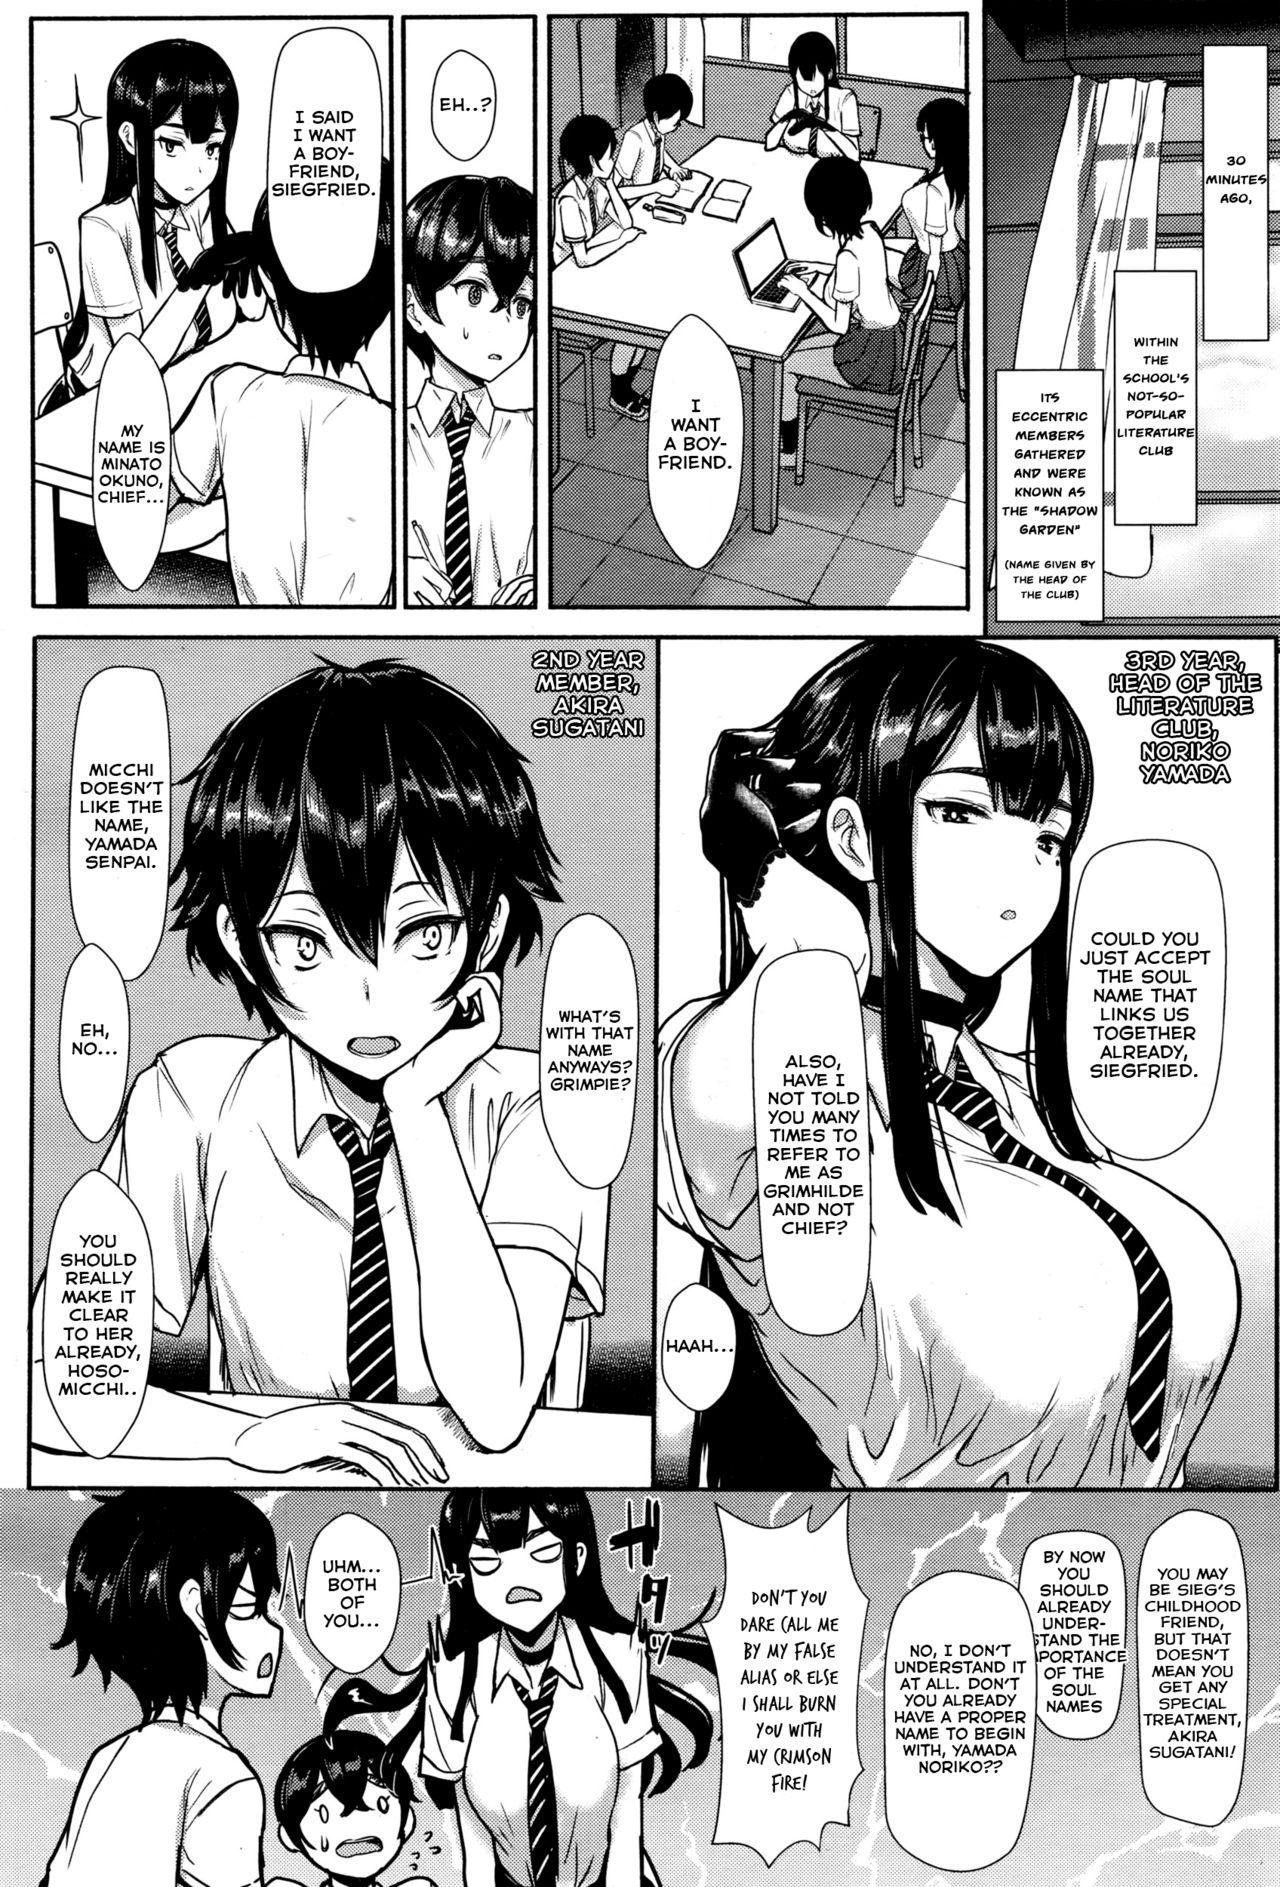 Smooth Hikage no Sono e Youkoso | Welcome to the Shadow Garden Doctor - Page 2